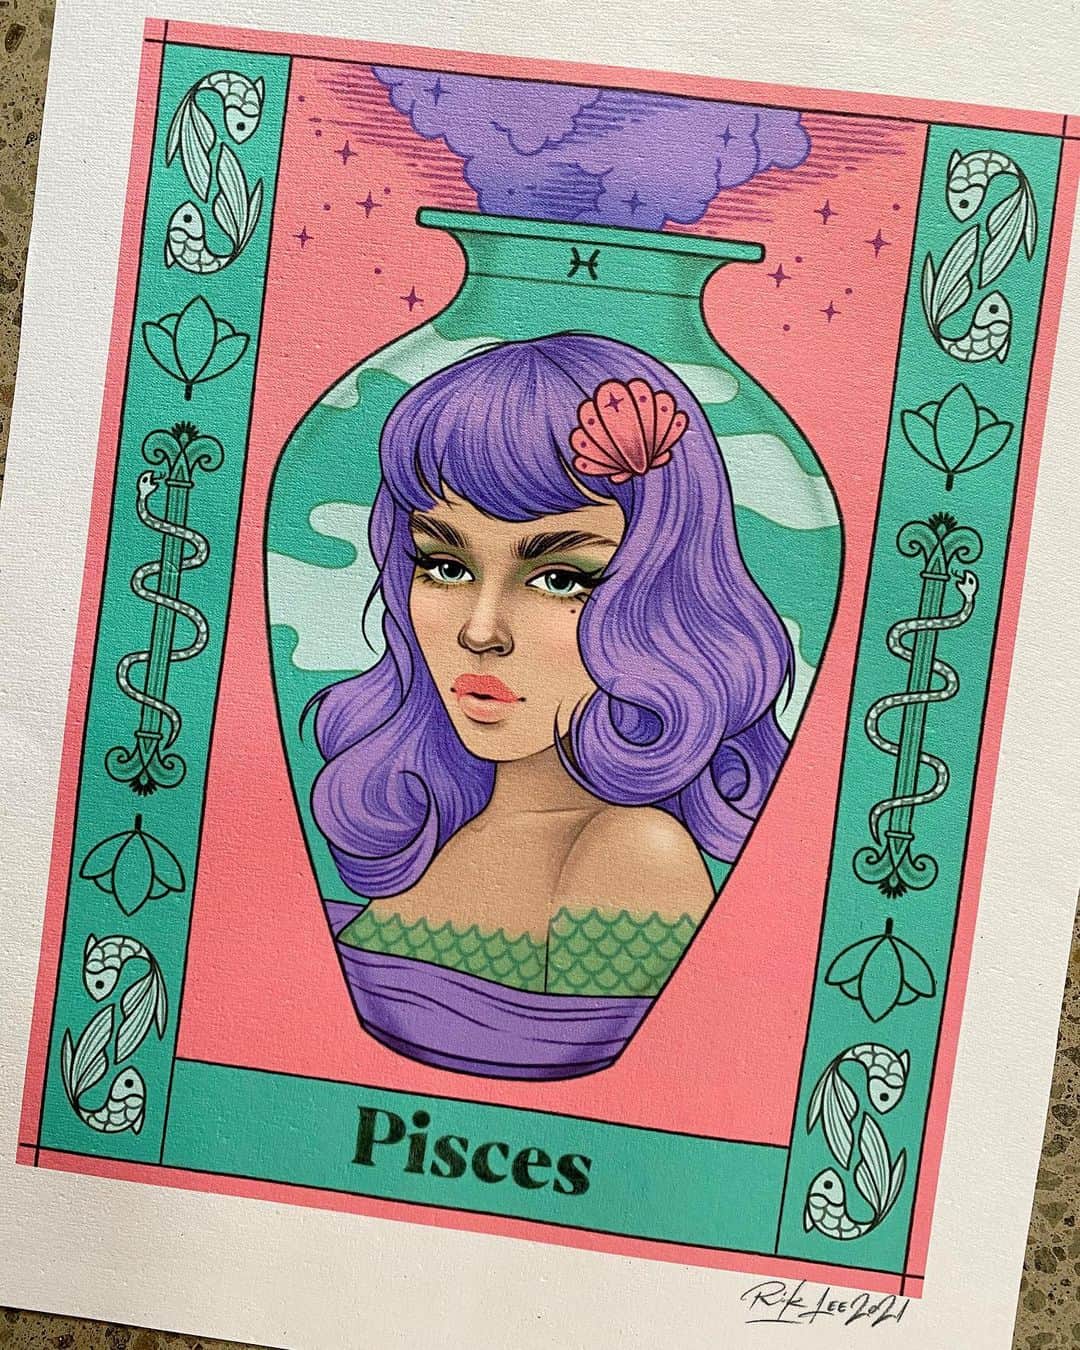 Rik Leeのインスタグラム：「PISCES ♓️  . I felt a little out of my comfort zone working with the greens and violets that typify the Pisces colour palette. In the end though, I’m really happy with how this piece came together.  . I have just 3 last zodiac signs to illustrate. Which one will be next? . #riklee #illustration #pisces #art #design #graphicdesign #poster #zodiac #mermaid #vase #tattoo」